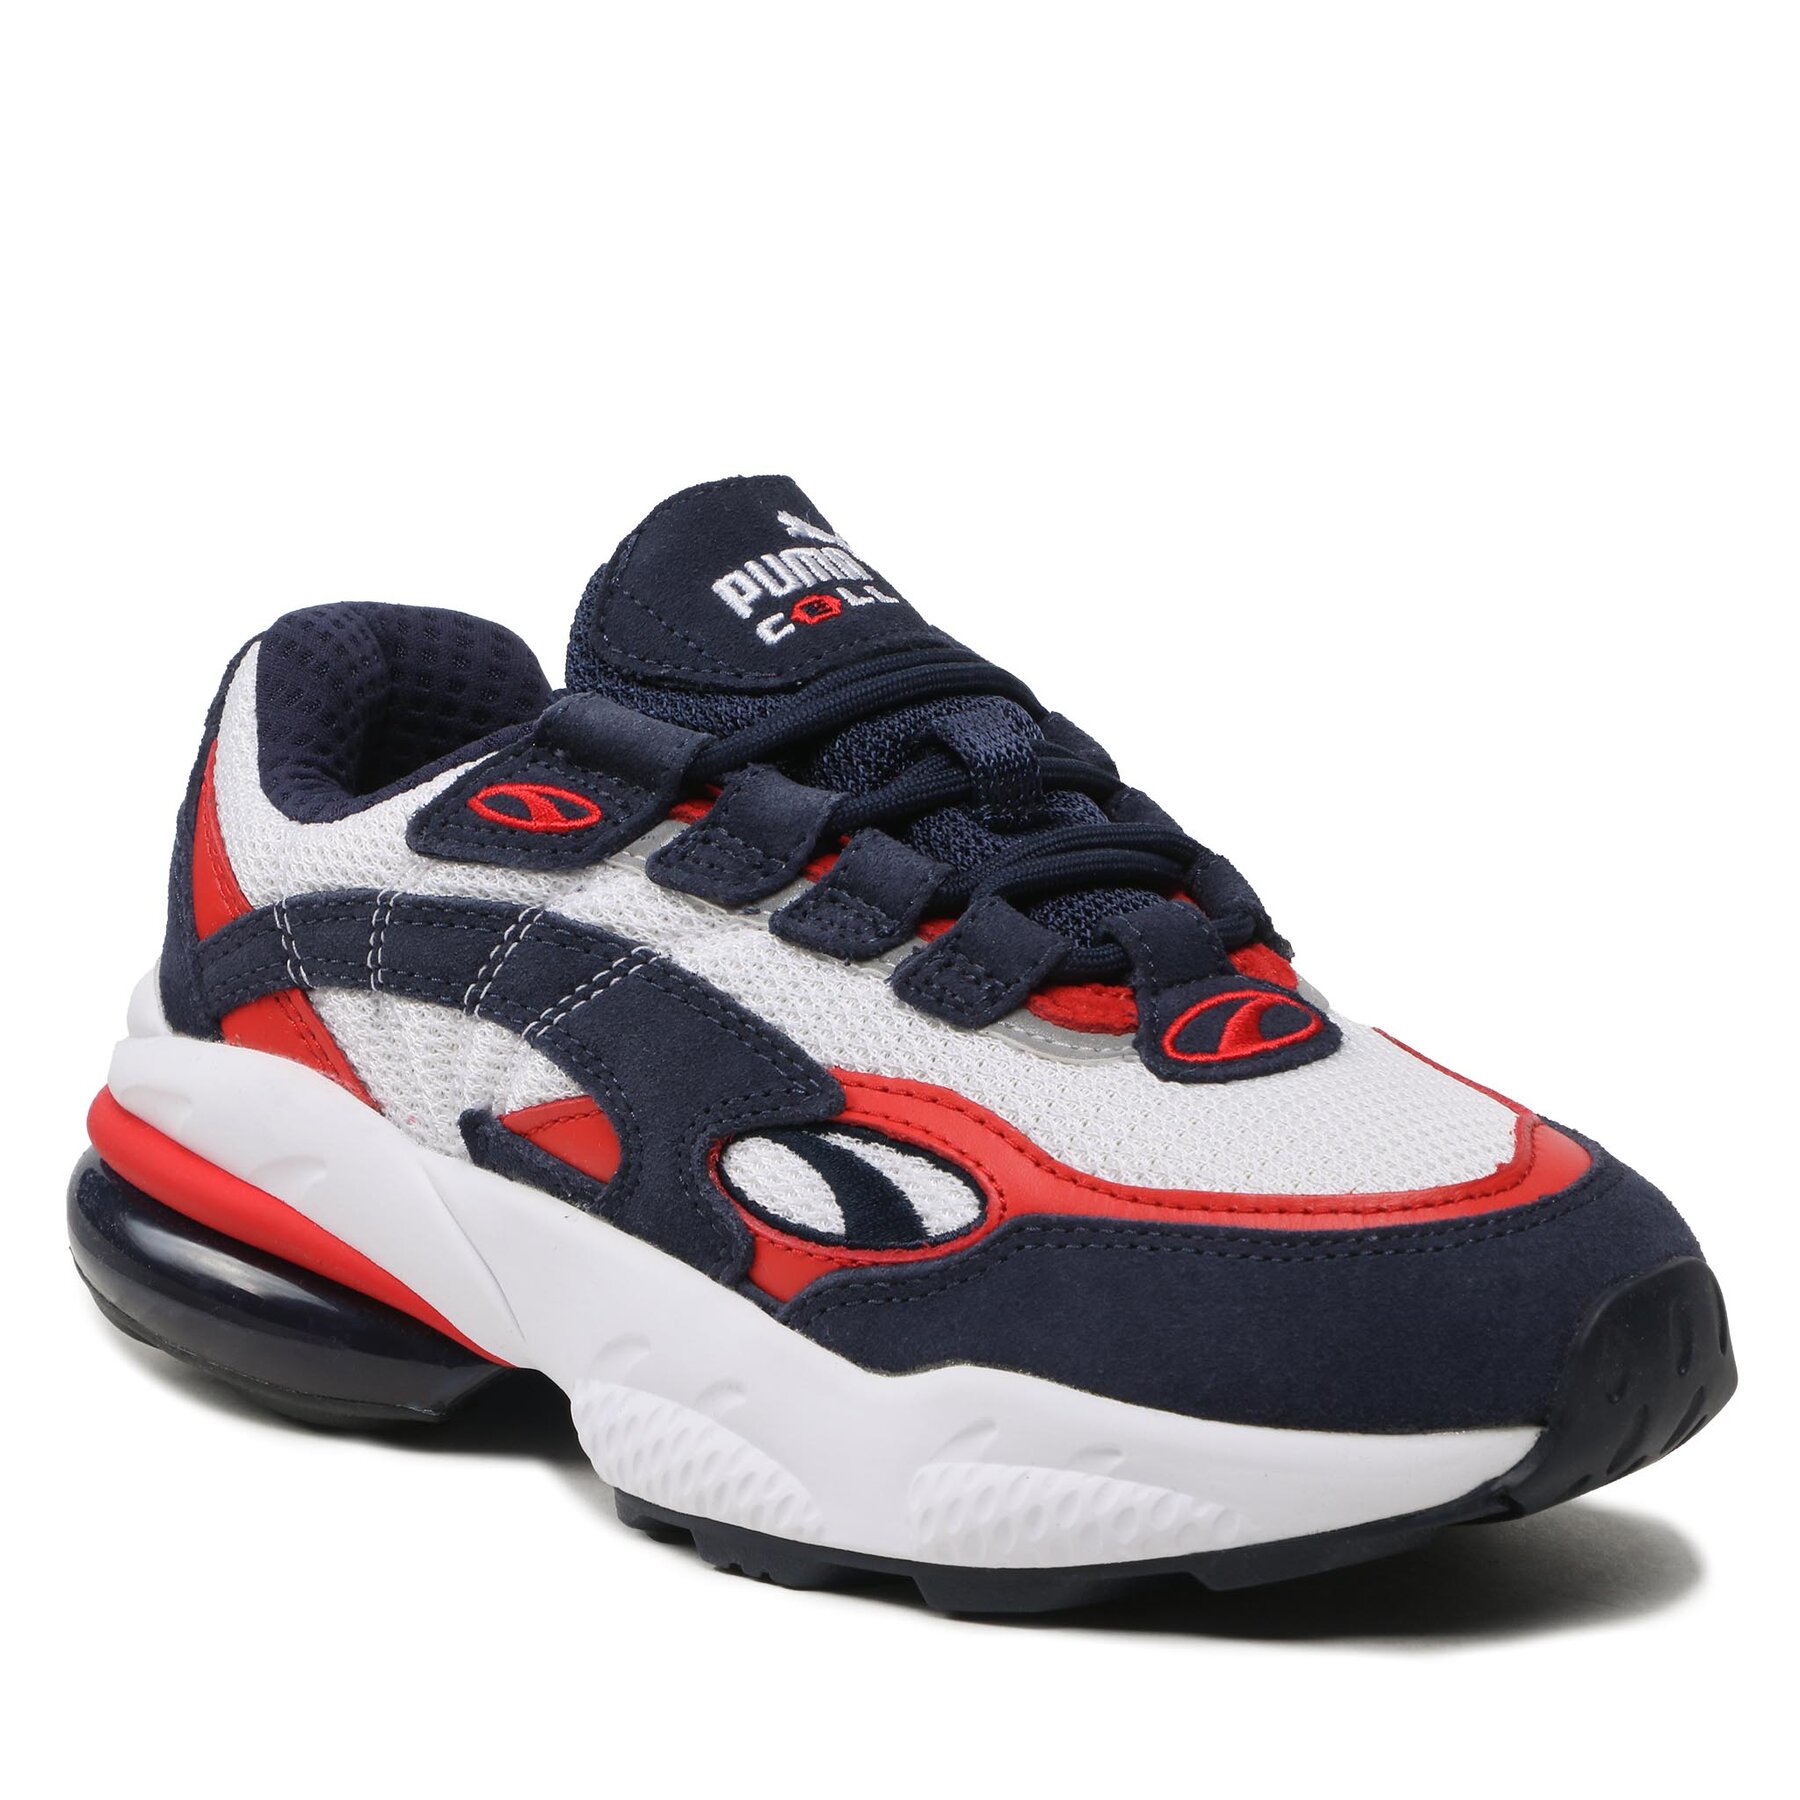 Sneakers Puma Cell Venom 369354 03 Peacoat/High Risk Red